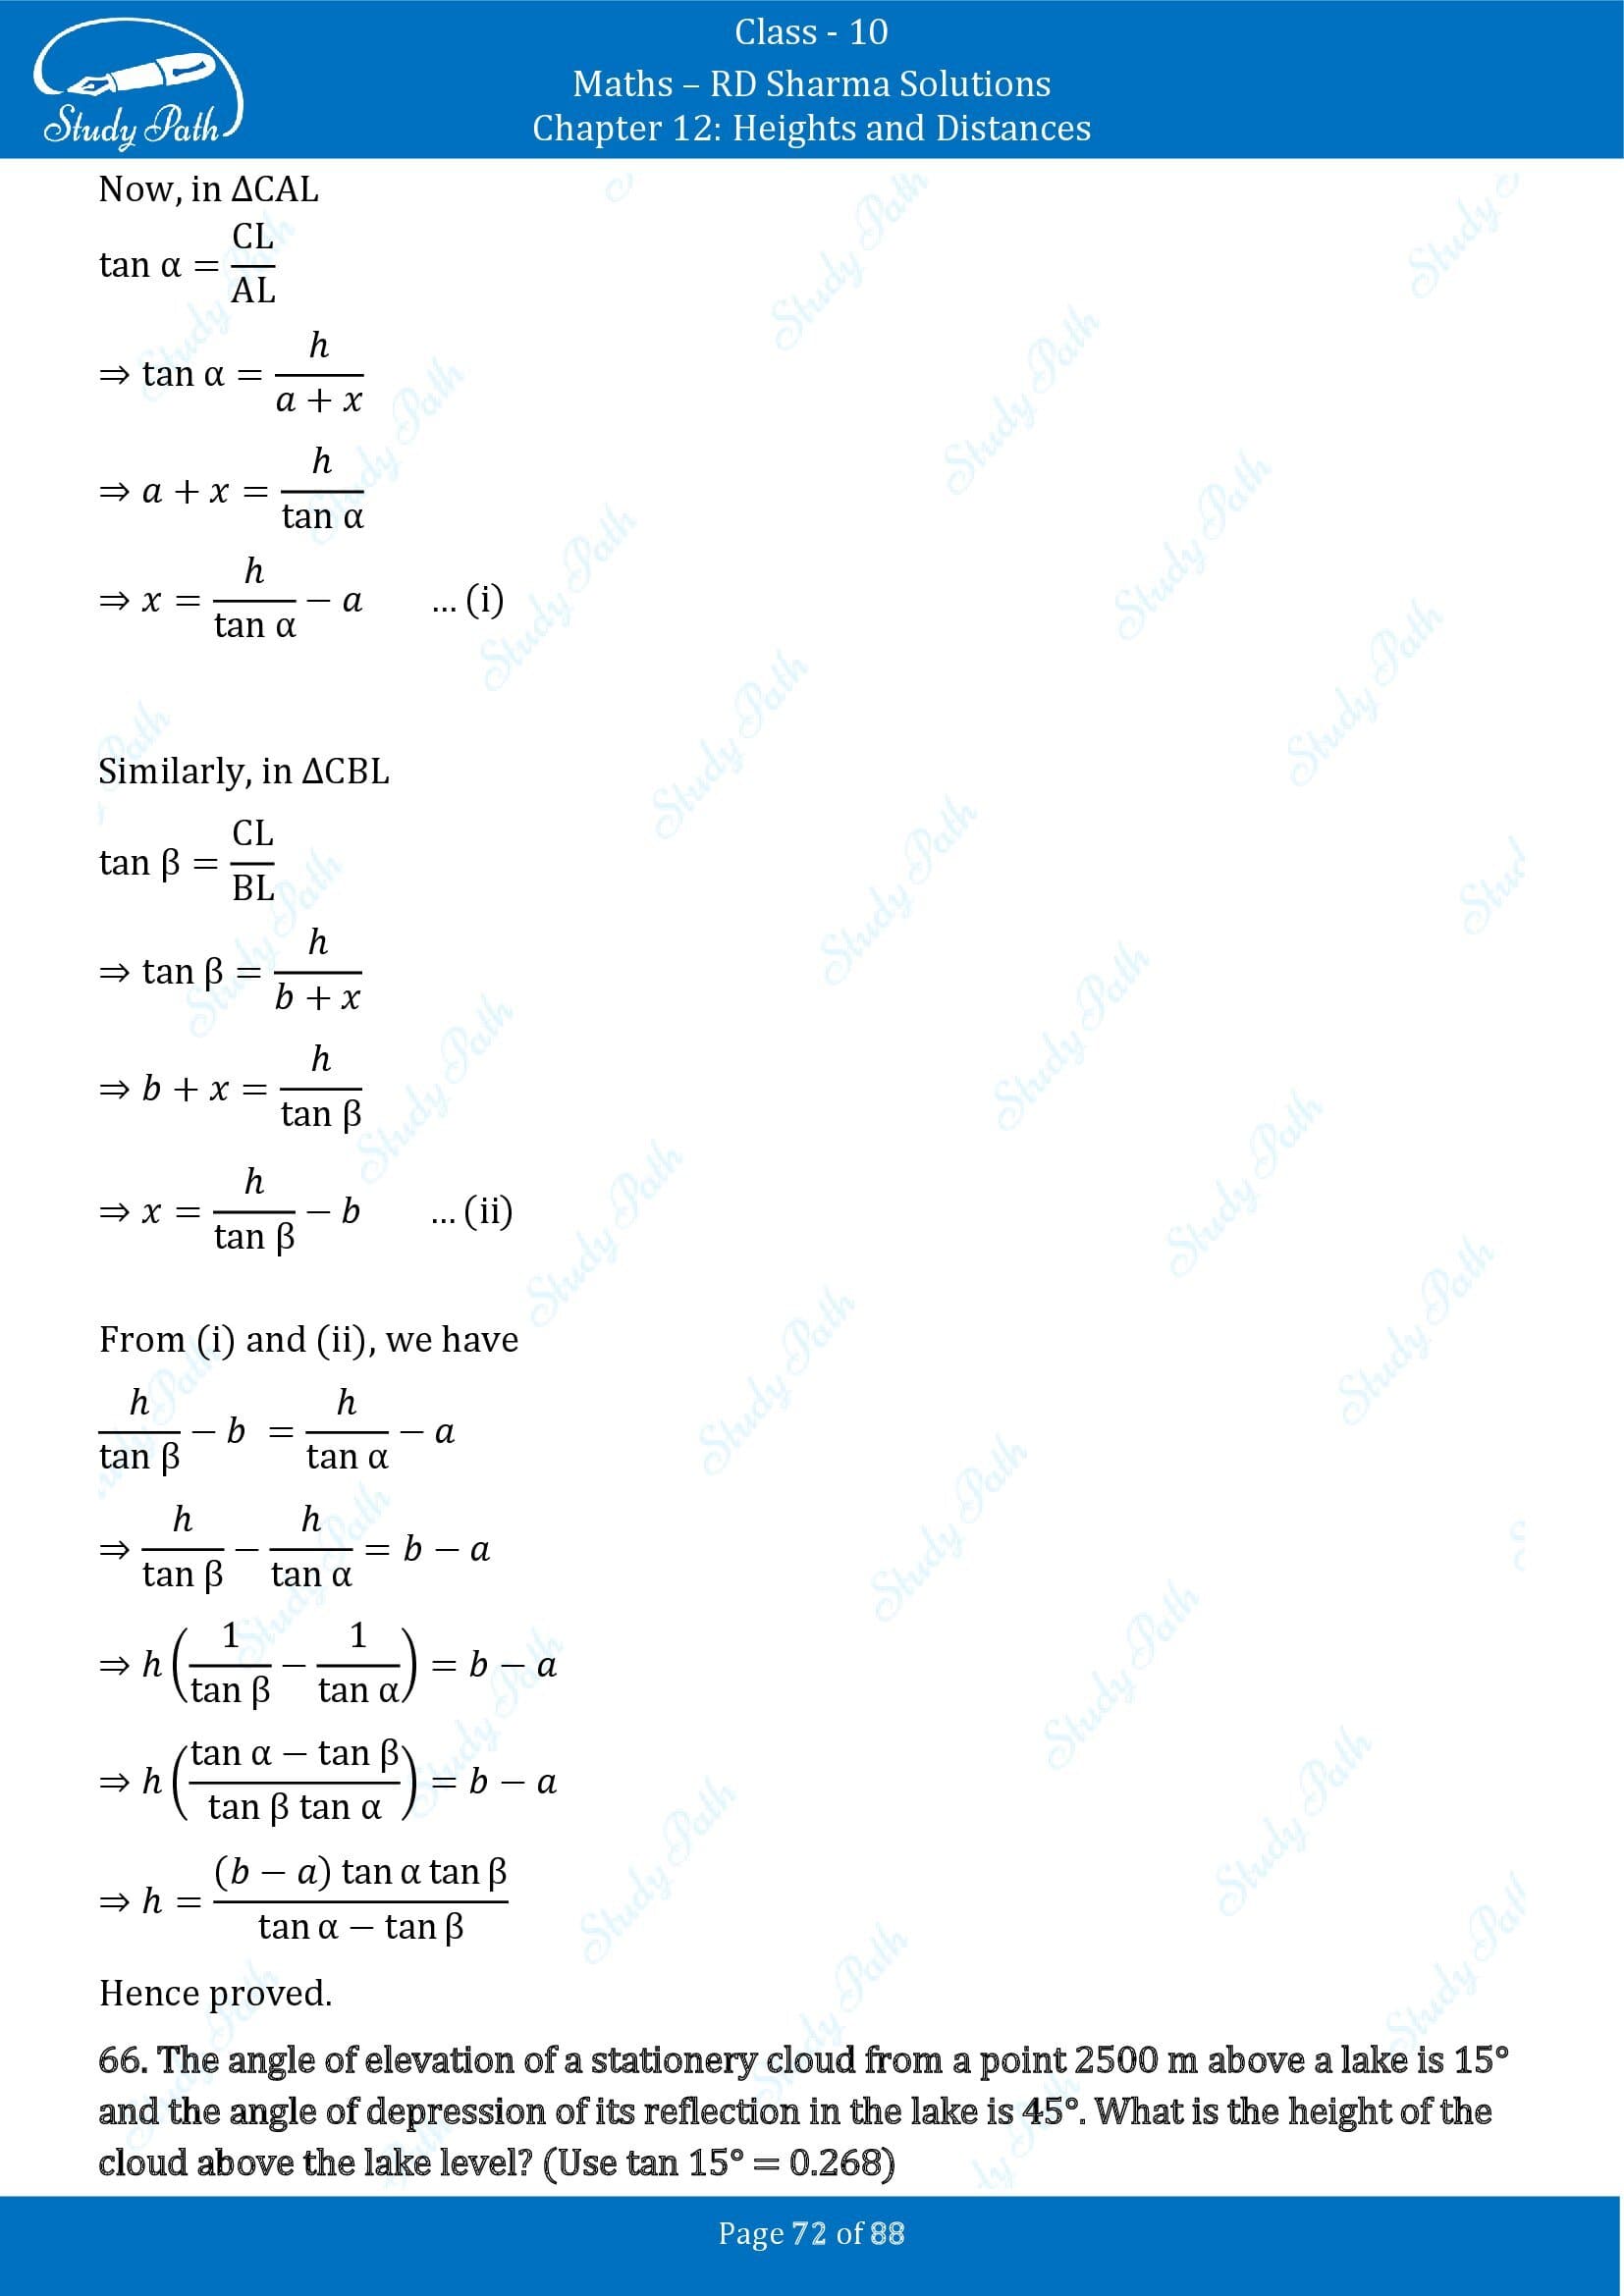 RD Sharma Solutions Class 10 Chapter 12 Heights and Distances Exercise 12.1 00072